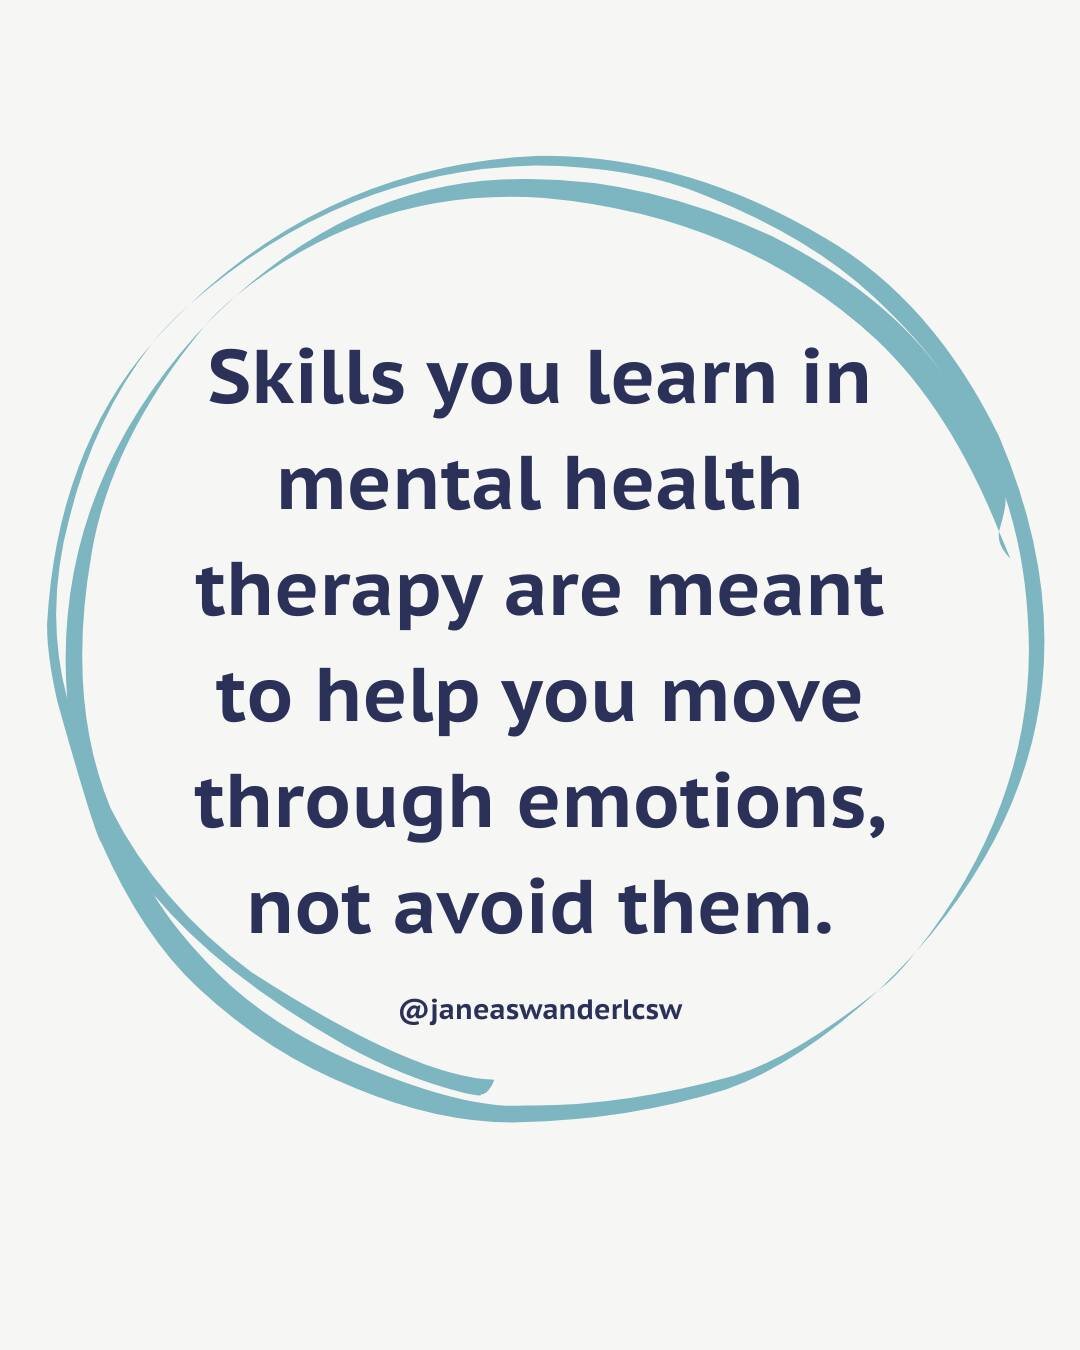 Mental health skills aren&rsquo;t meant to be a bandaid on your issues.

They&rsquo;re not meant to help you numb out from your emotions.

They&rsquo;re not meant to help you avoid dealing with challenging memories or thoughts.

They&rsquo;re not mea